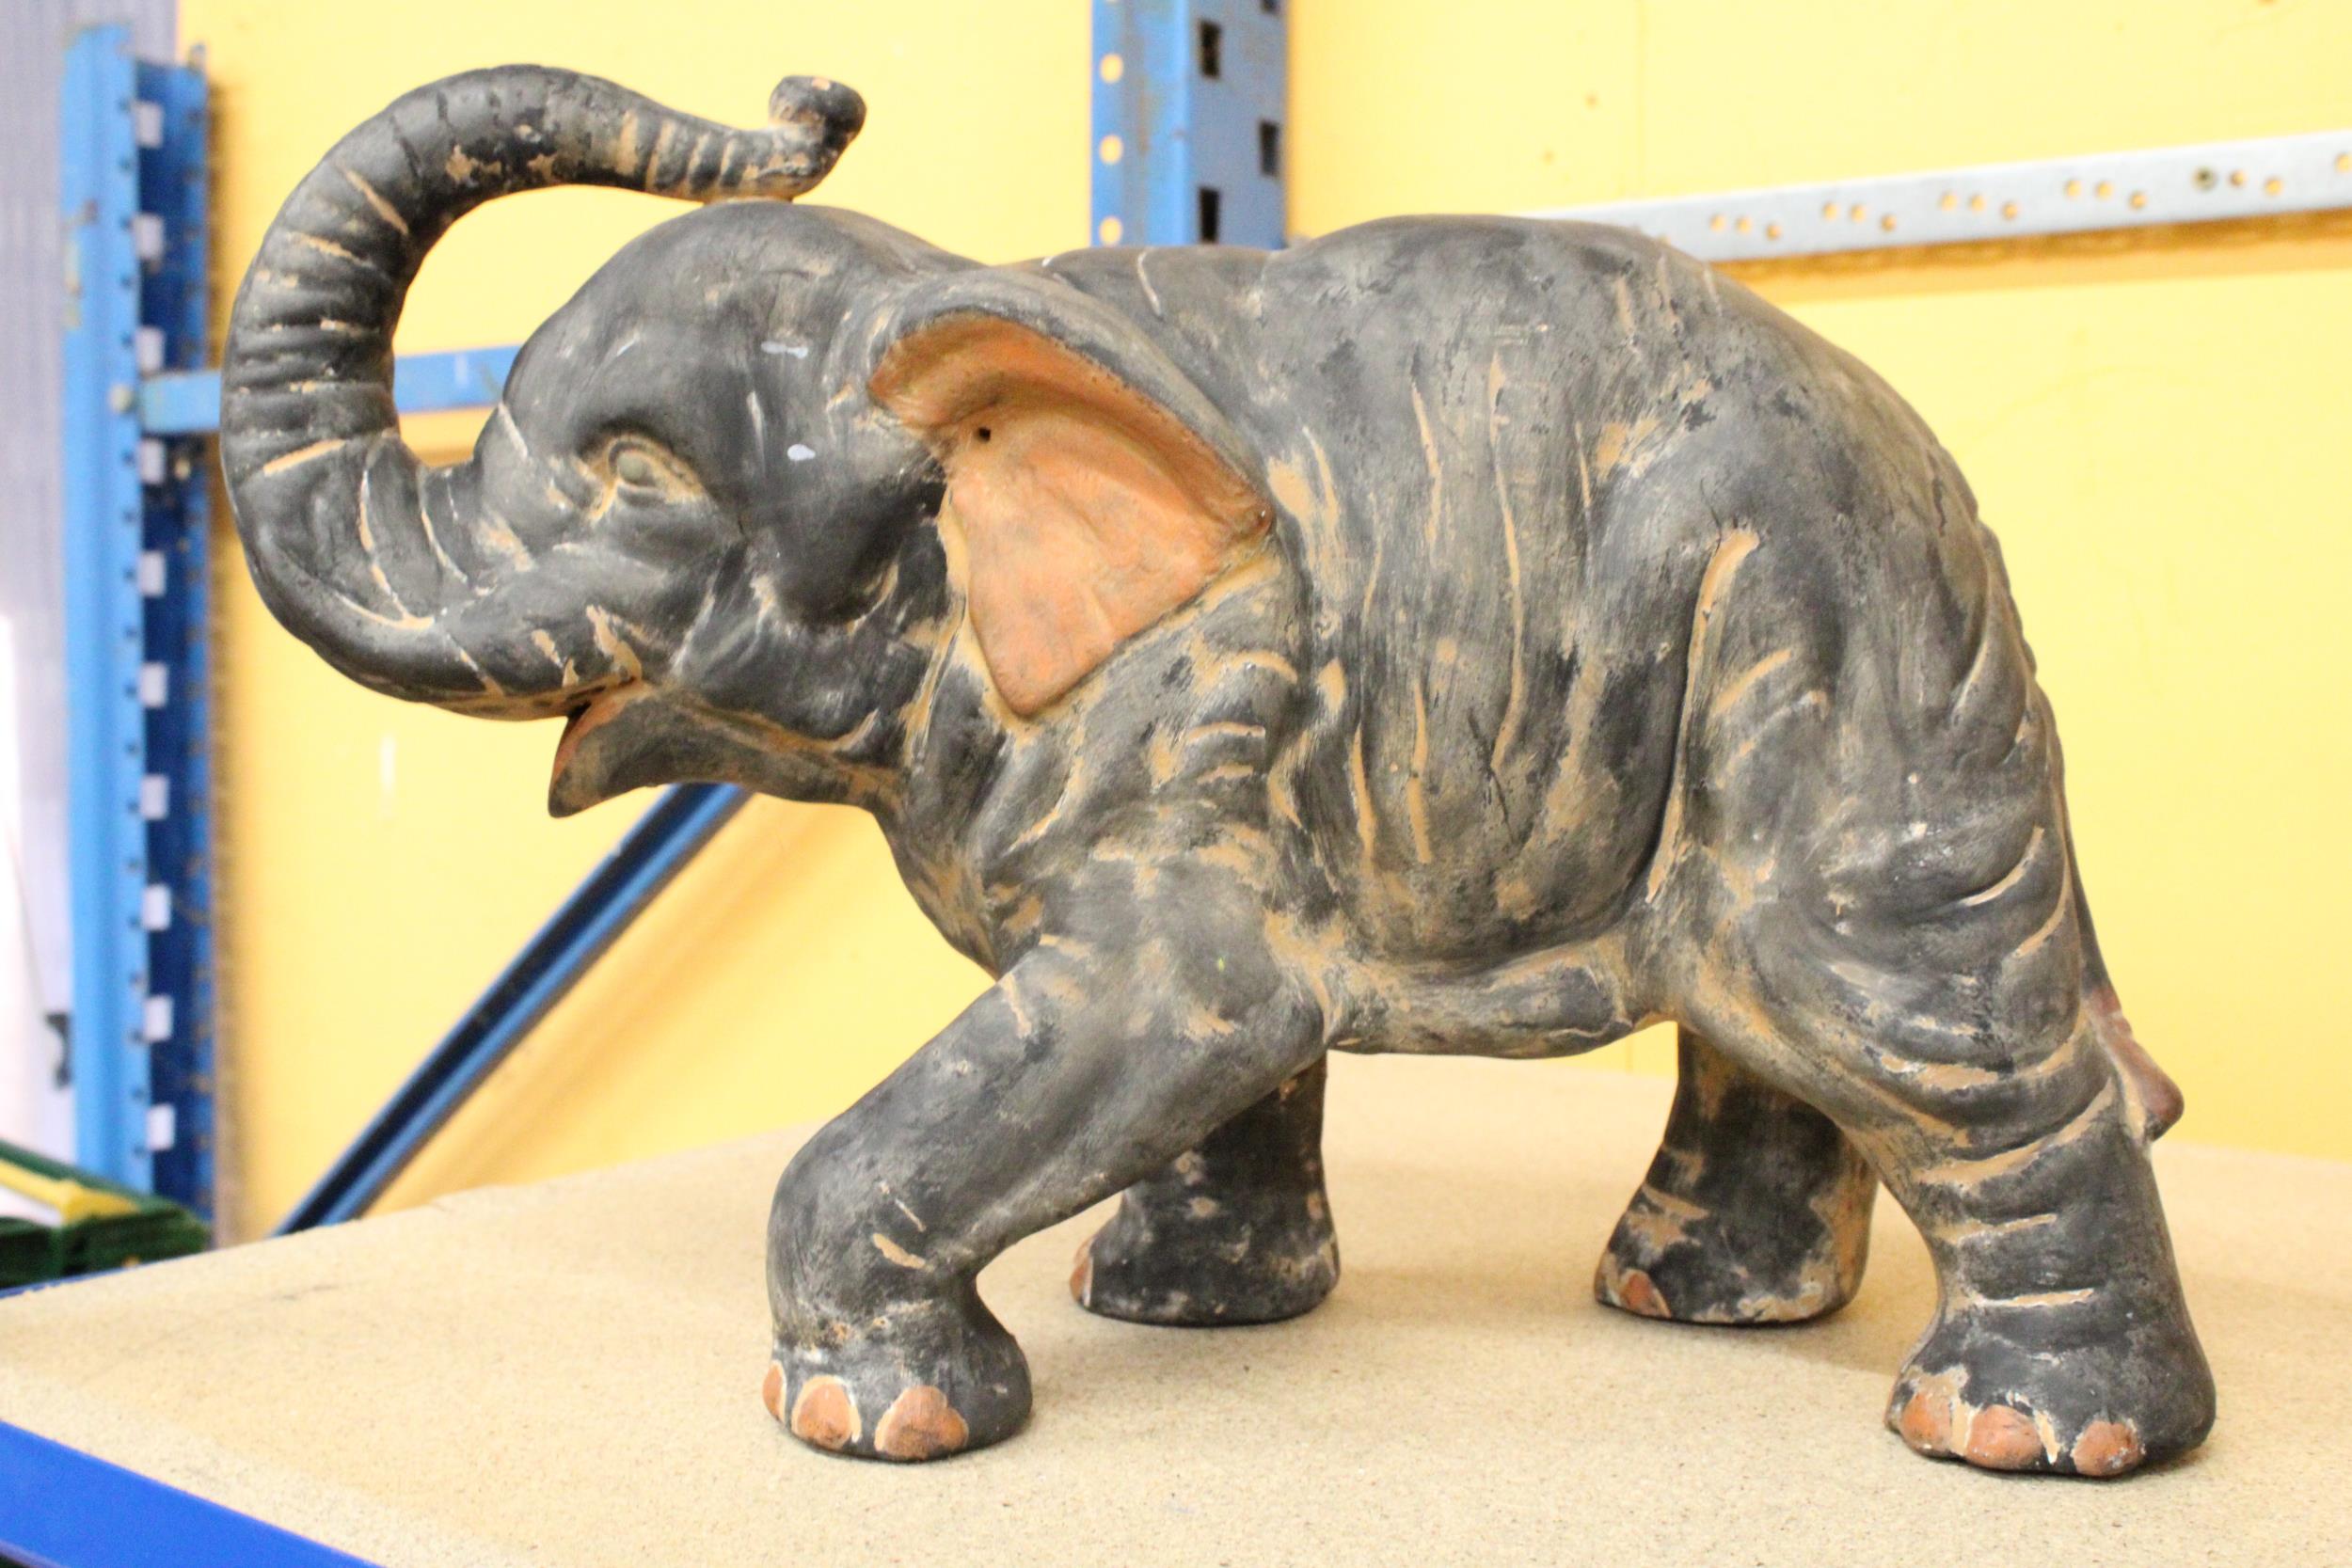 A LARGE STONE WARE ELEPHANT ORNAMENT - Image 3 of 4